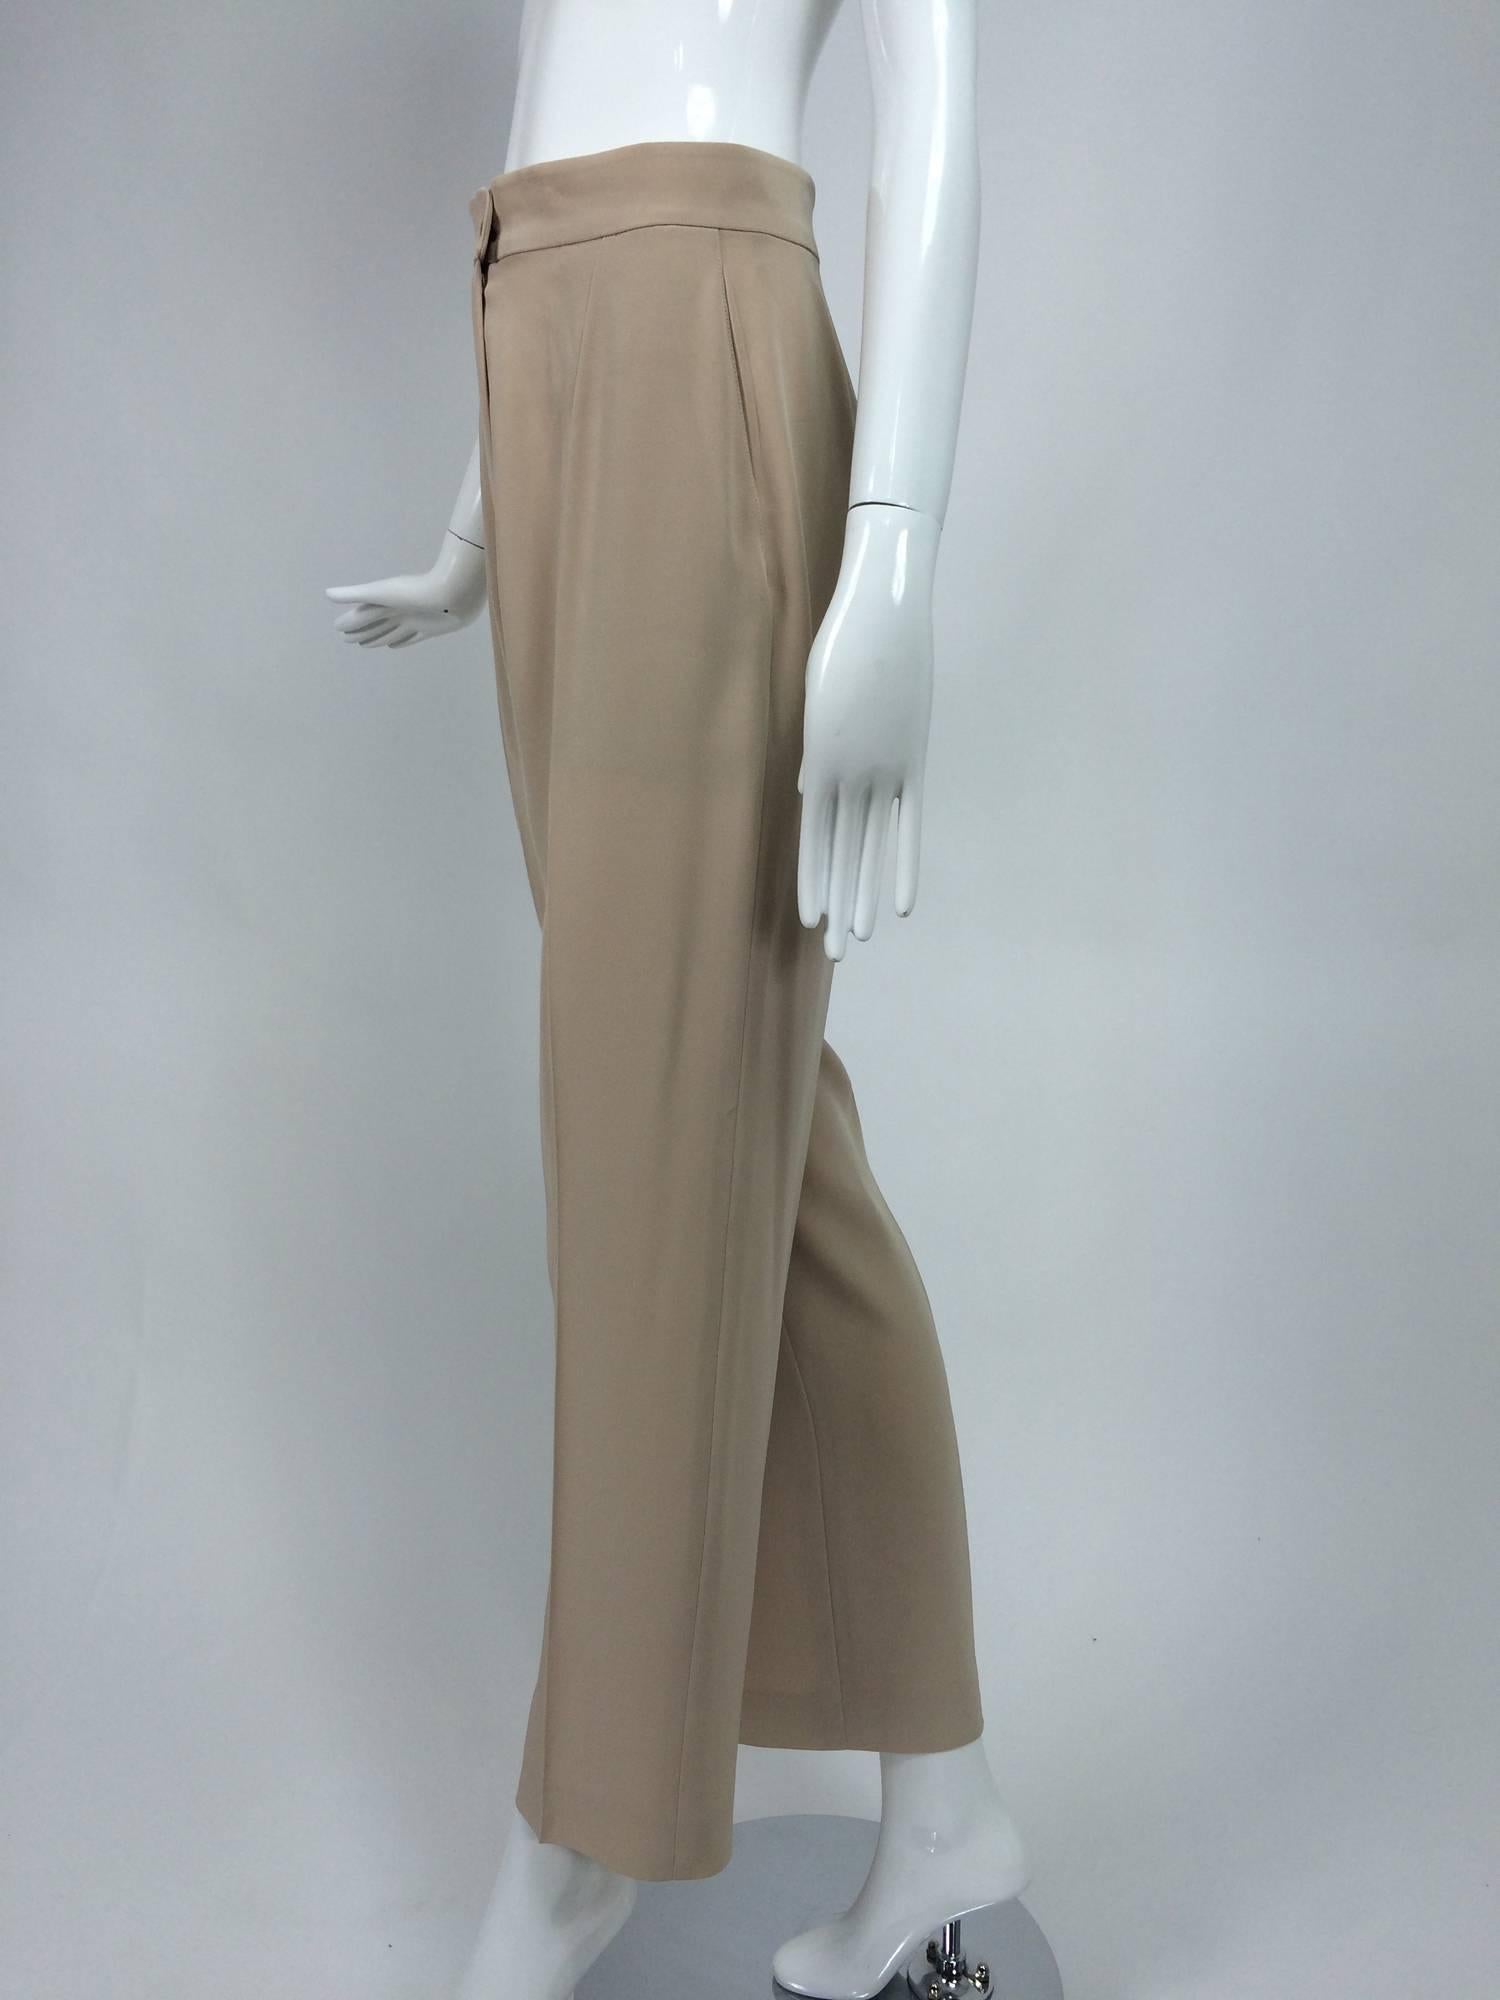 Chanel taupe banded waist fly front trouser 38...Classic flat front trouser with a banded waist, button and fly front closure...Side pockets...In barely, if ever, worn condition...Marked size 38

In excellent wearable condition... All our clothing